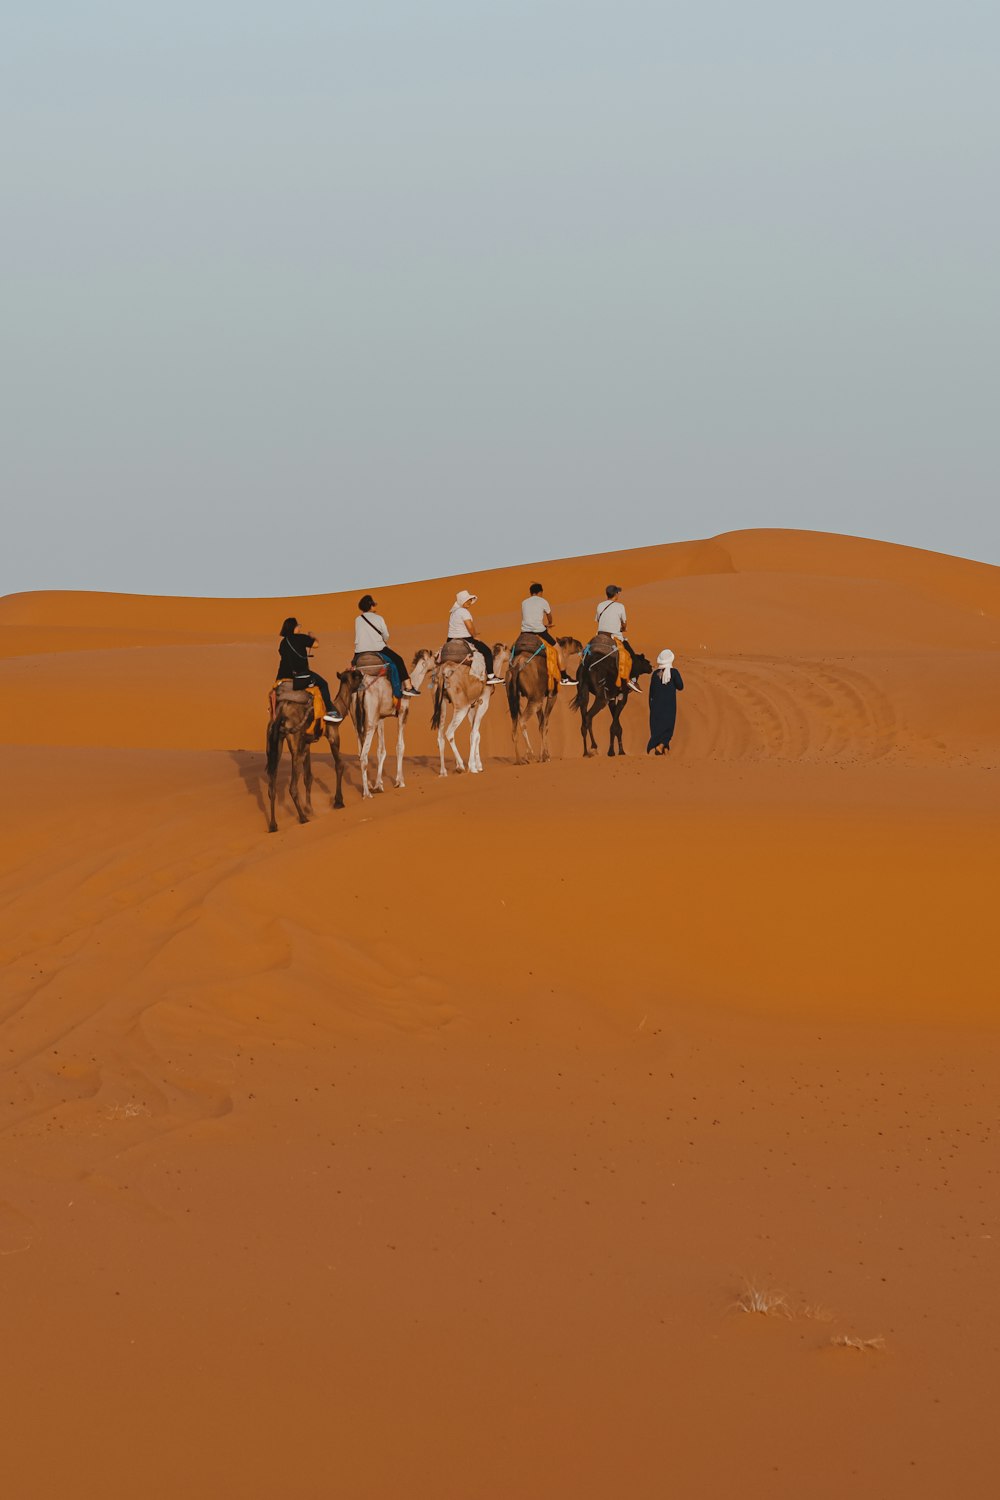 a group of people riding on the backs of horses in the desert